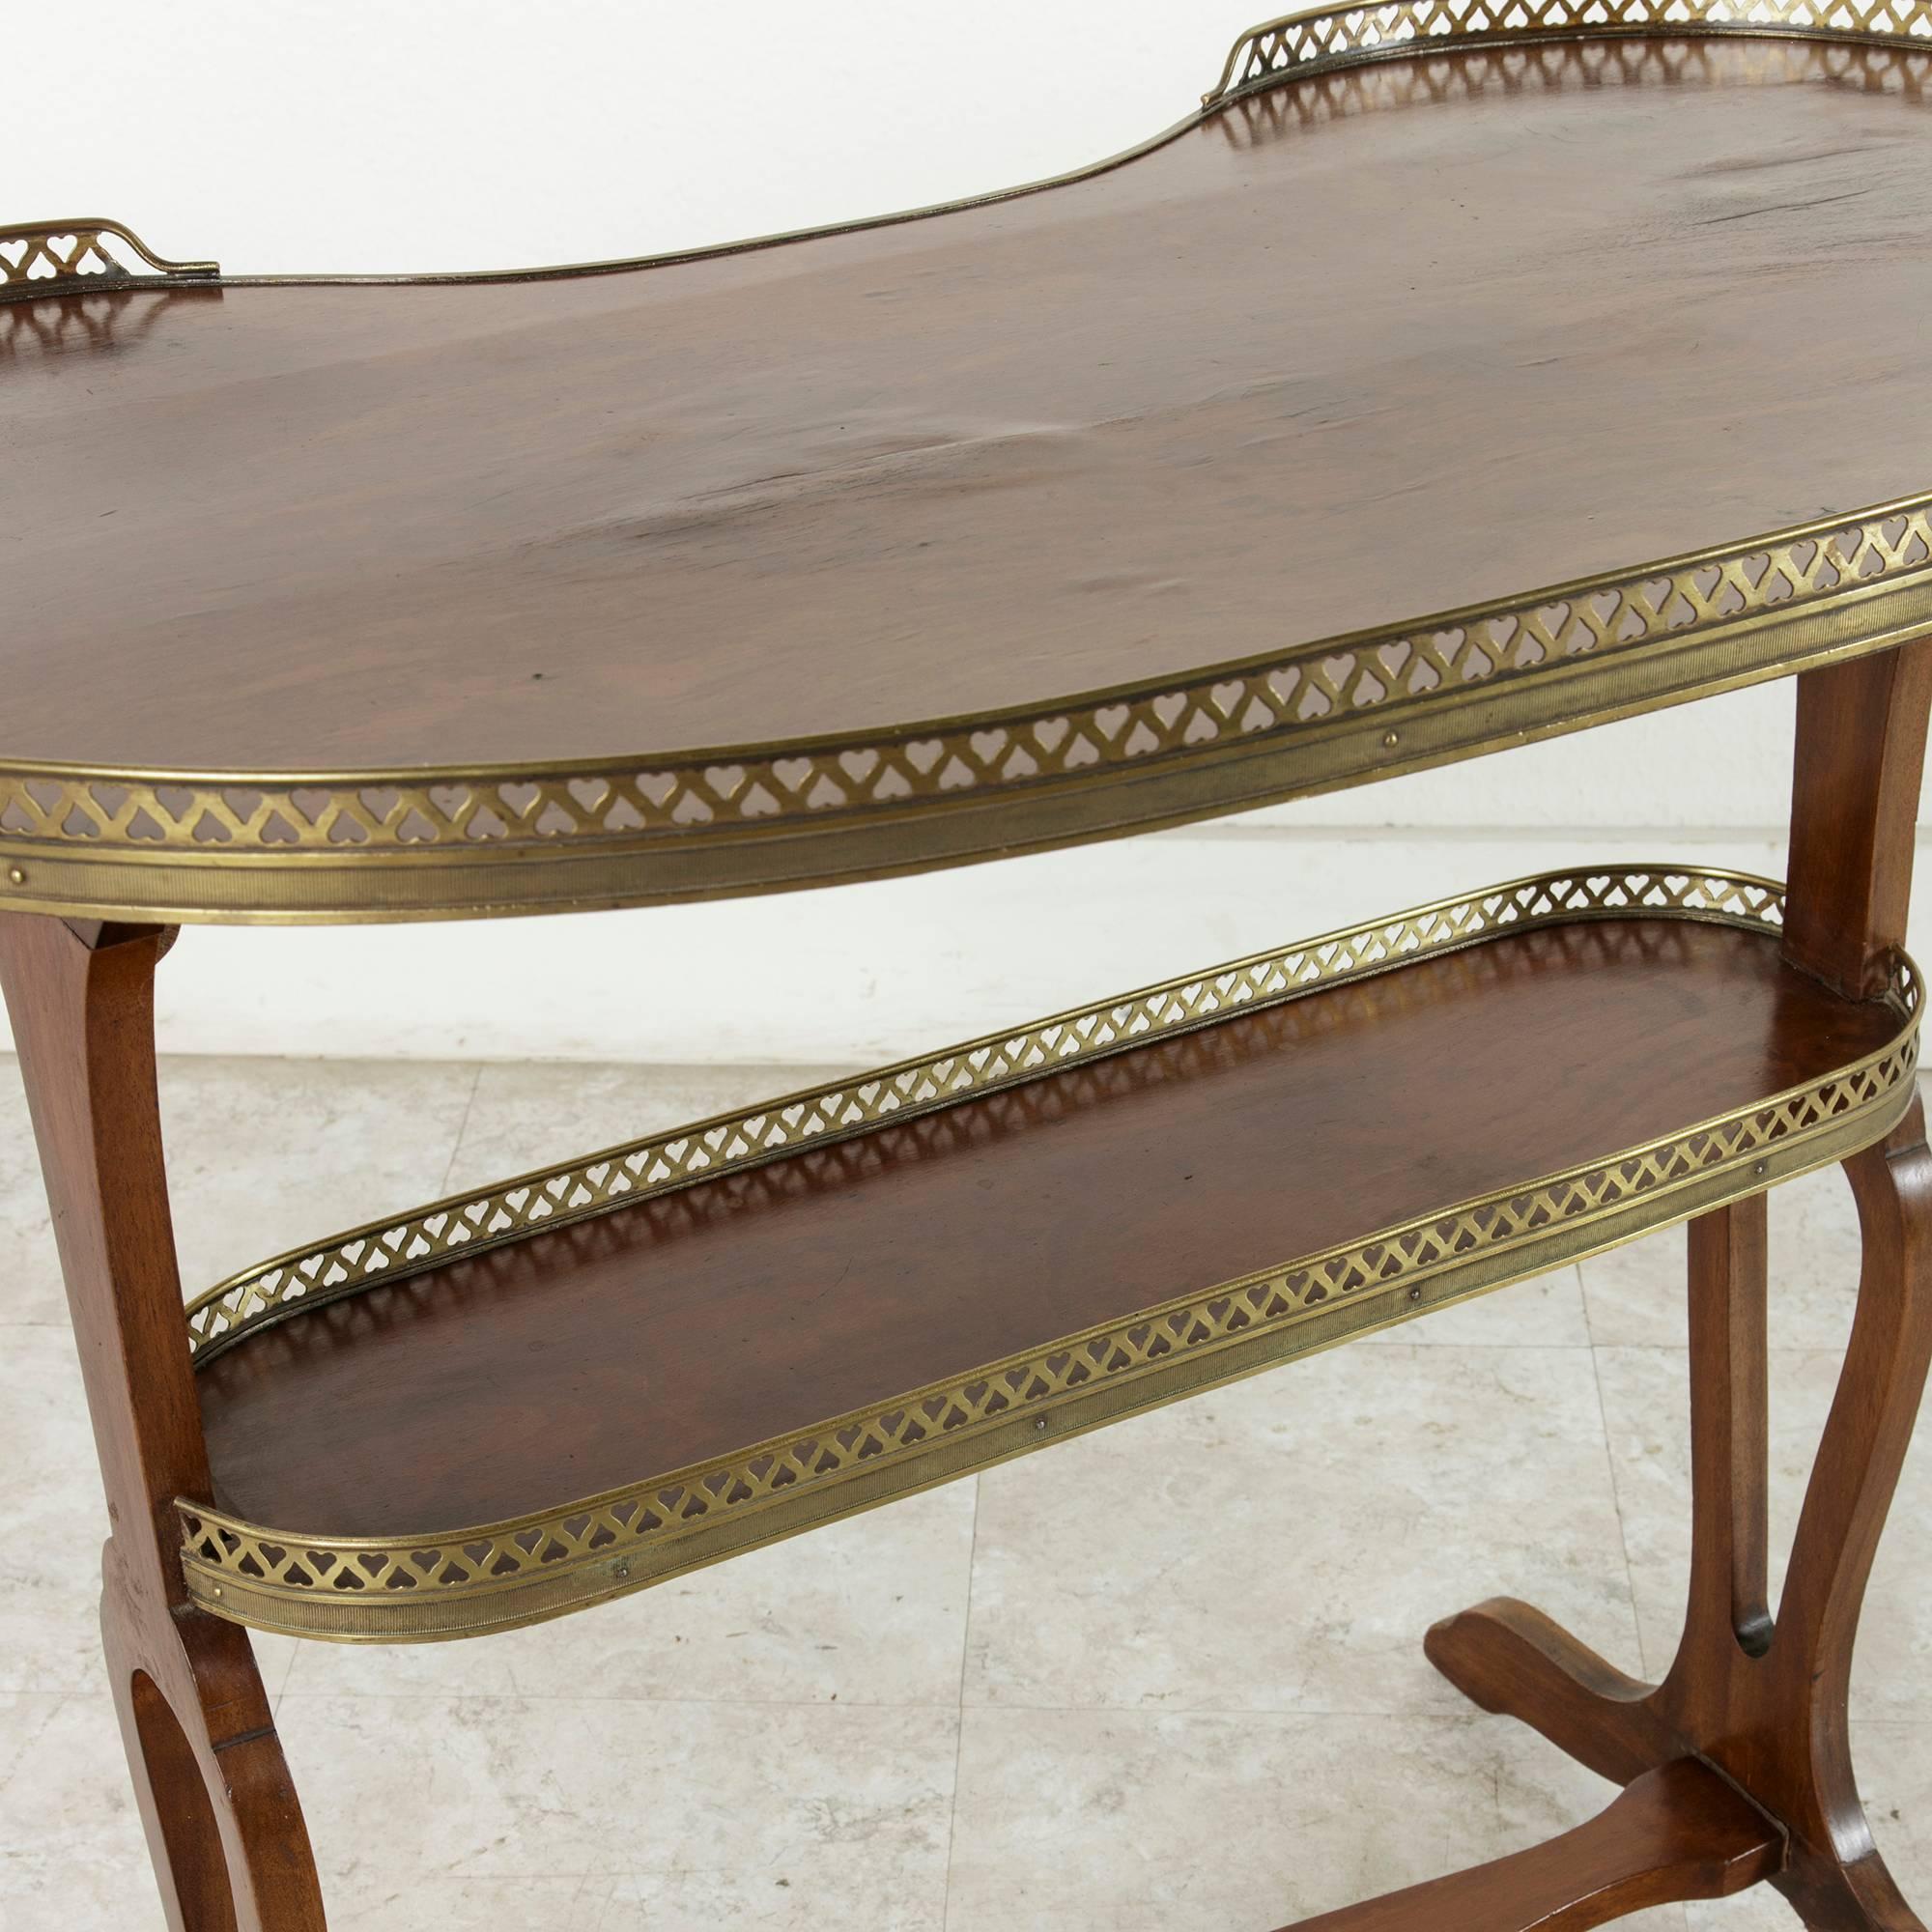 Restauration Period Rognon or Kidney Side Table in Mahogany with Bronze Gallery 3